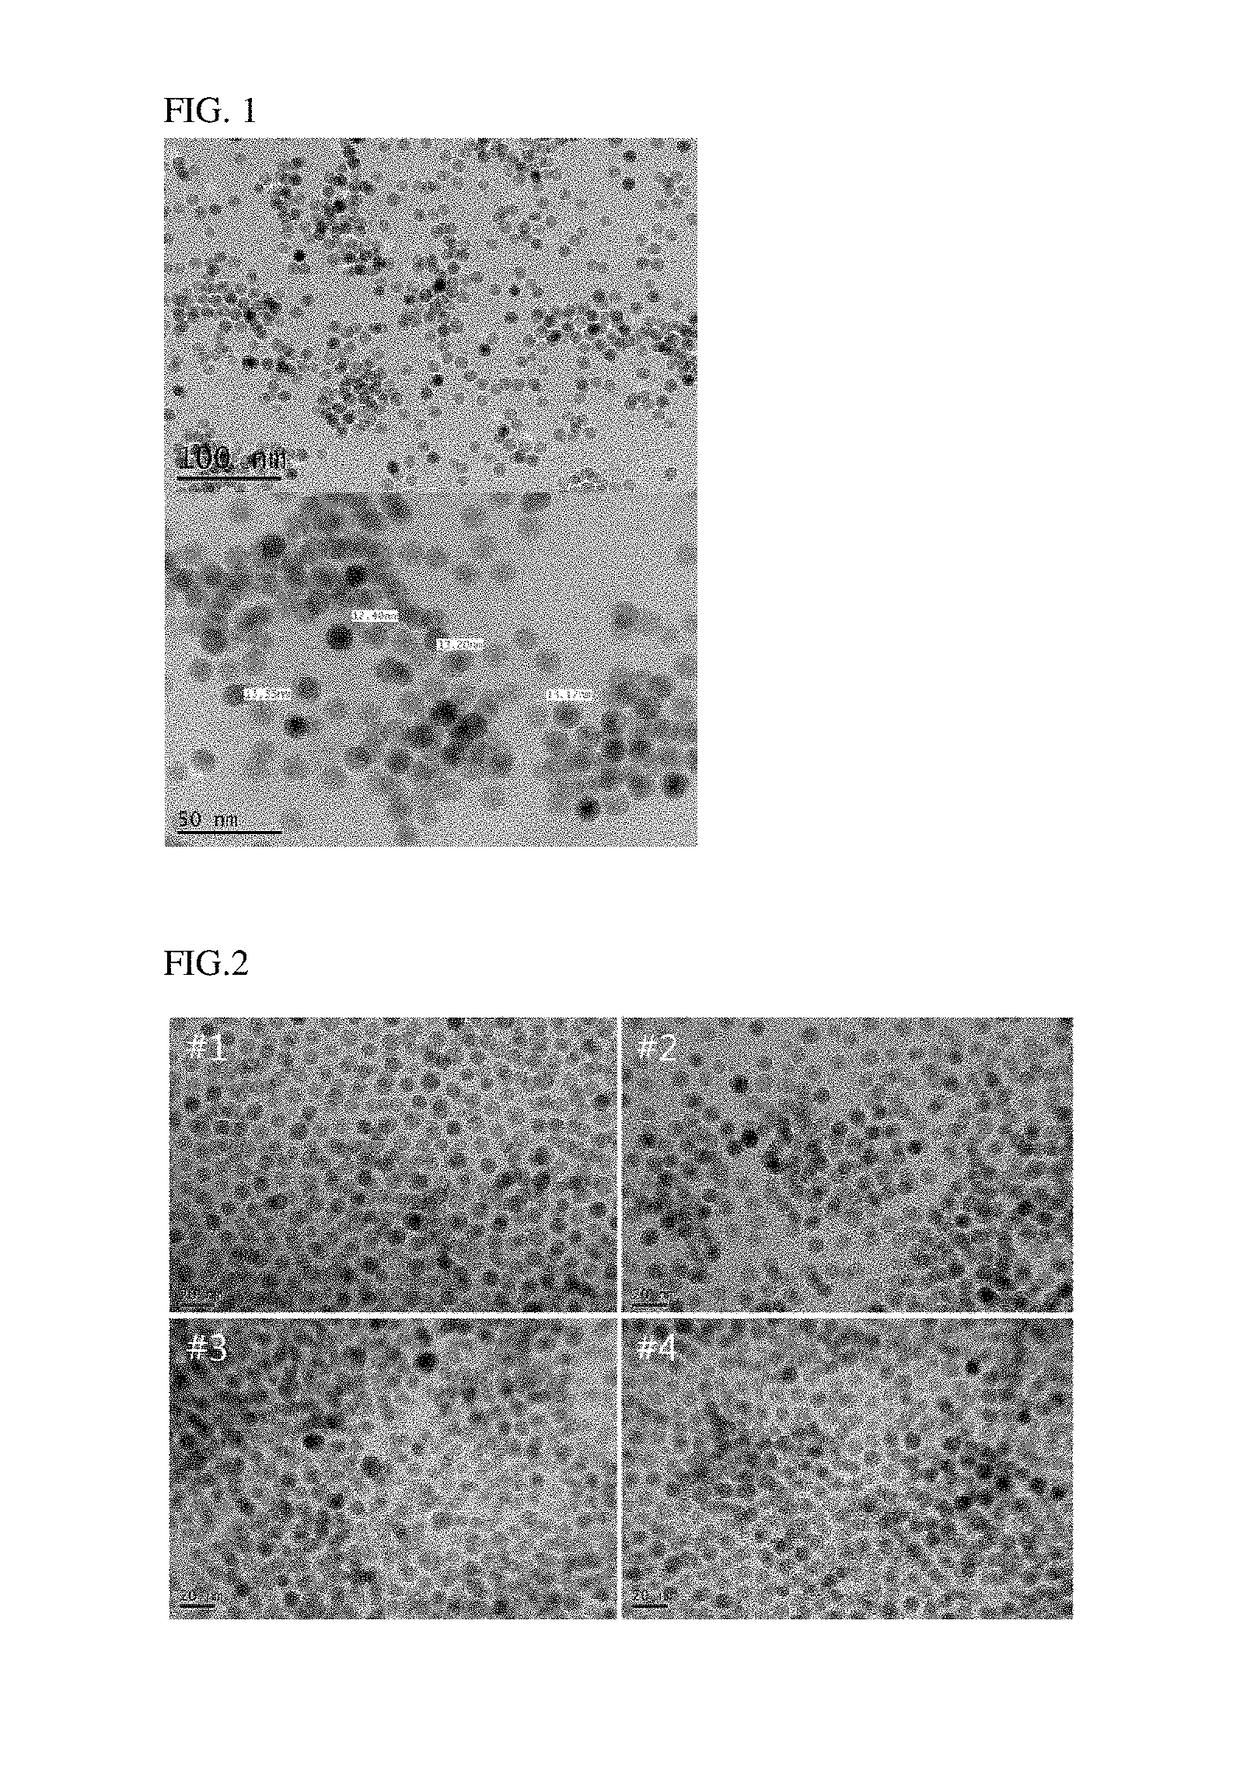 Method for preparing uniform metal oxide nanoparticles with high reproducibility